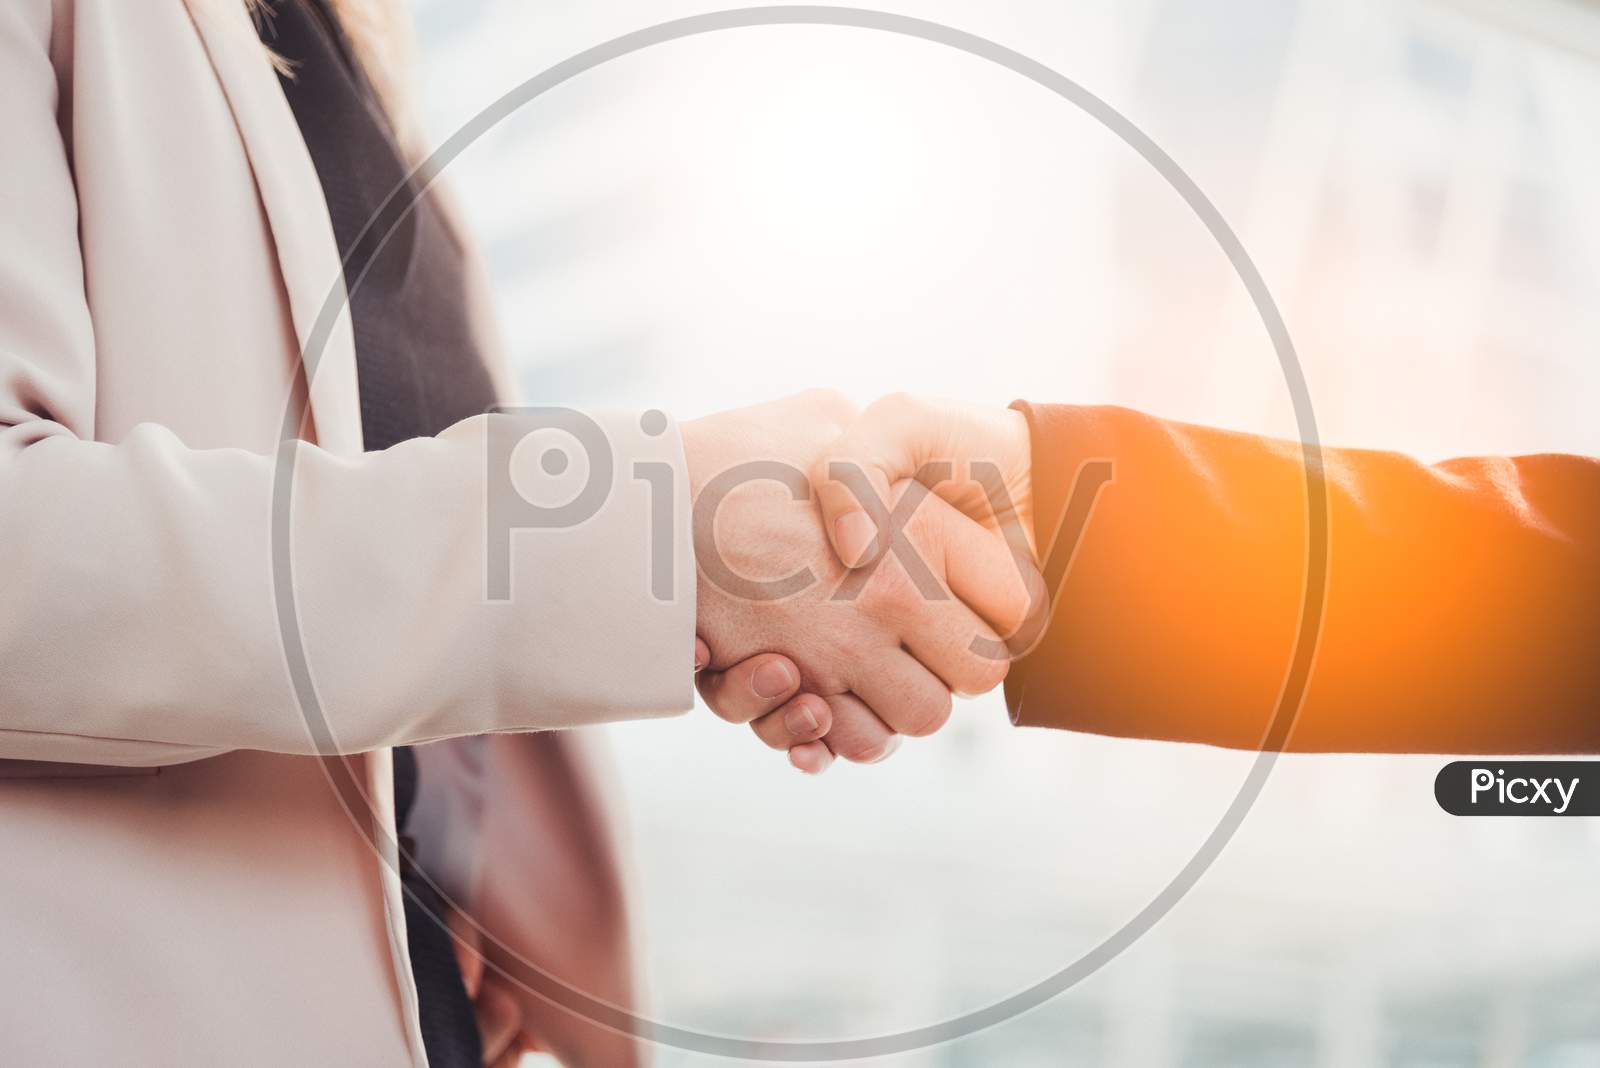 Business People Hand Shake For Dealing With New Project. Business And People Concept. Contact Agreement And Job Application Theme. City And Urban Theme.